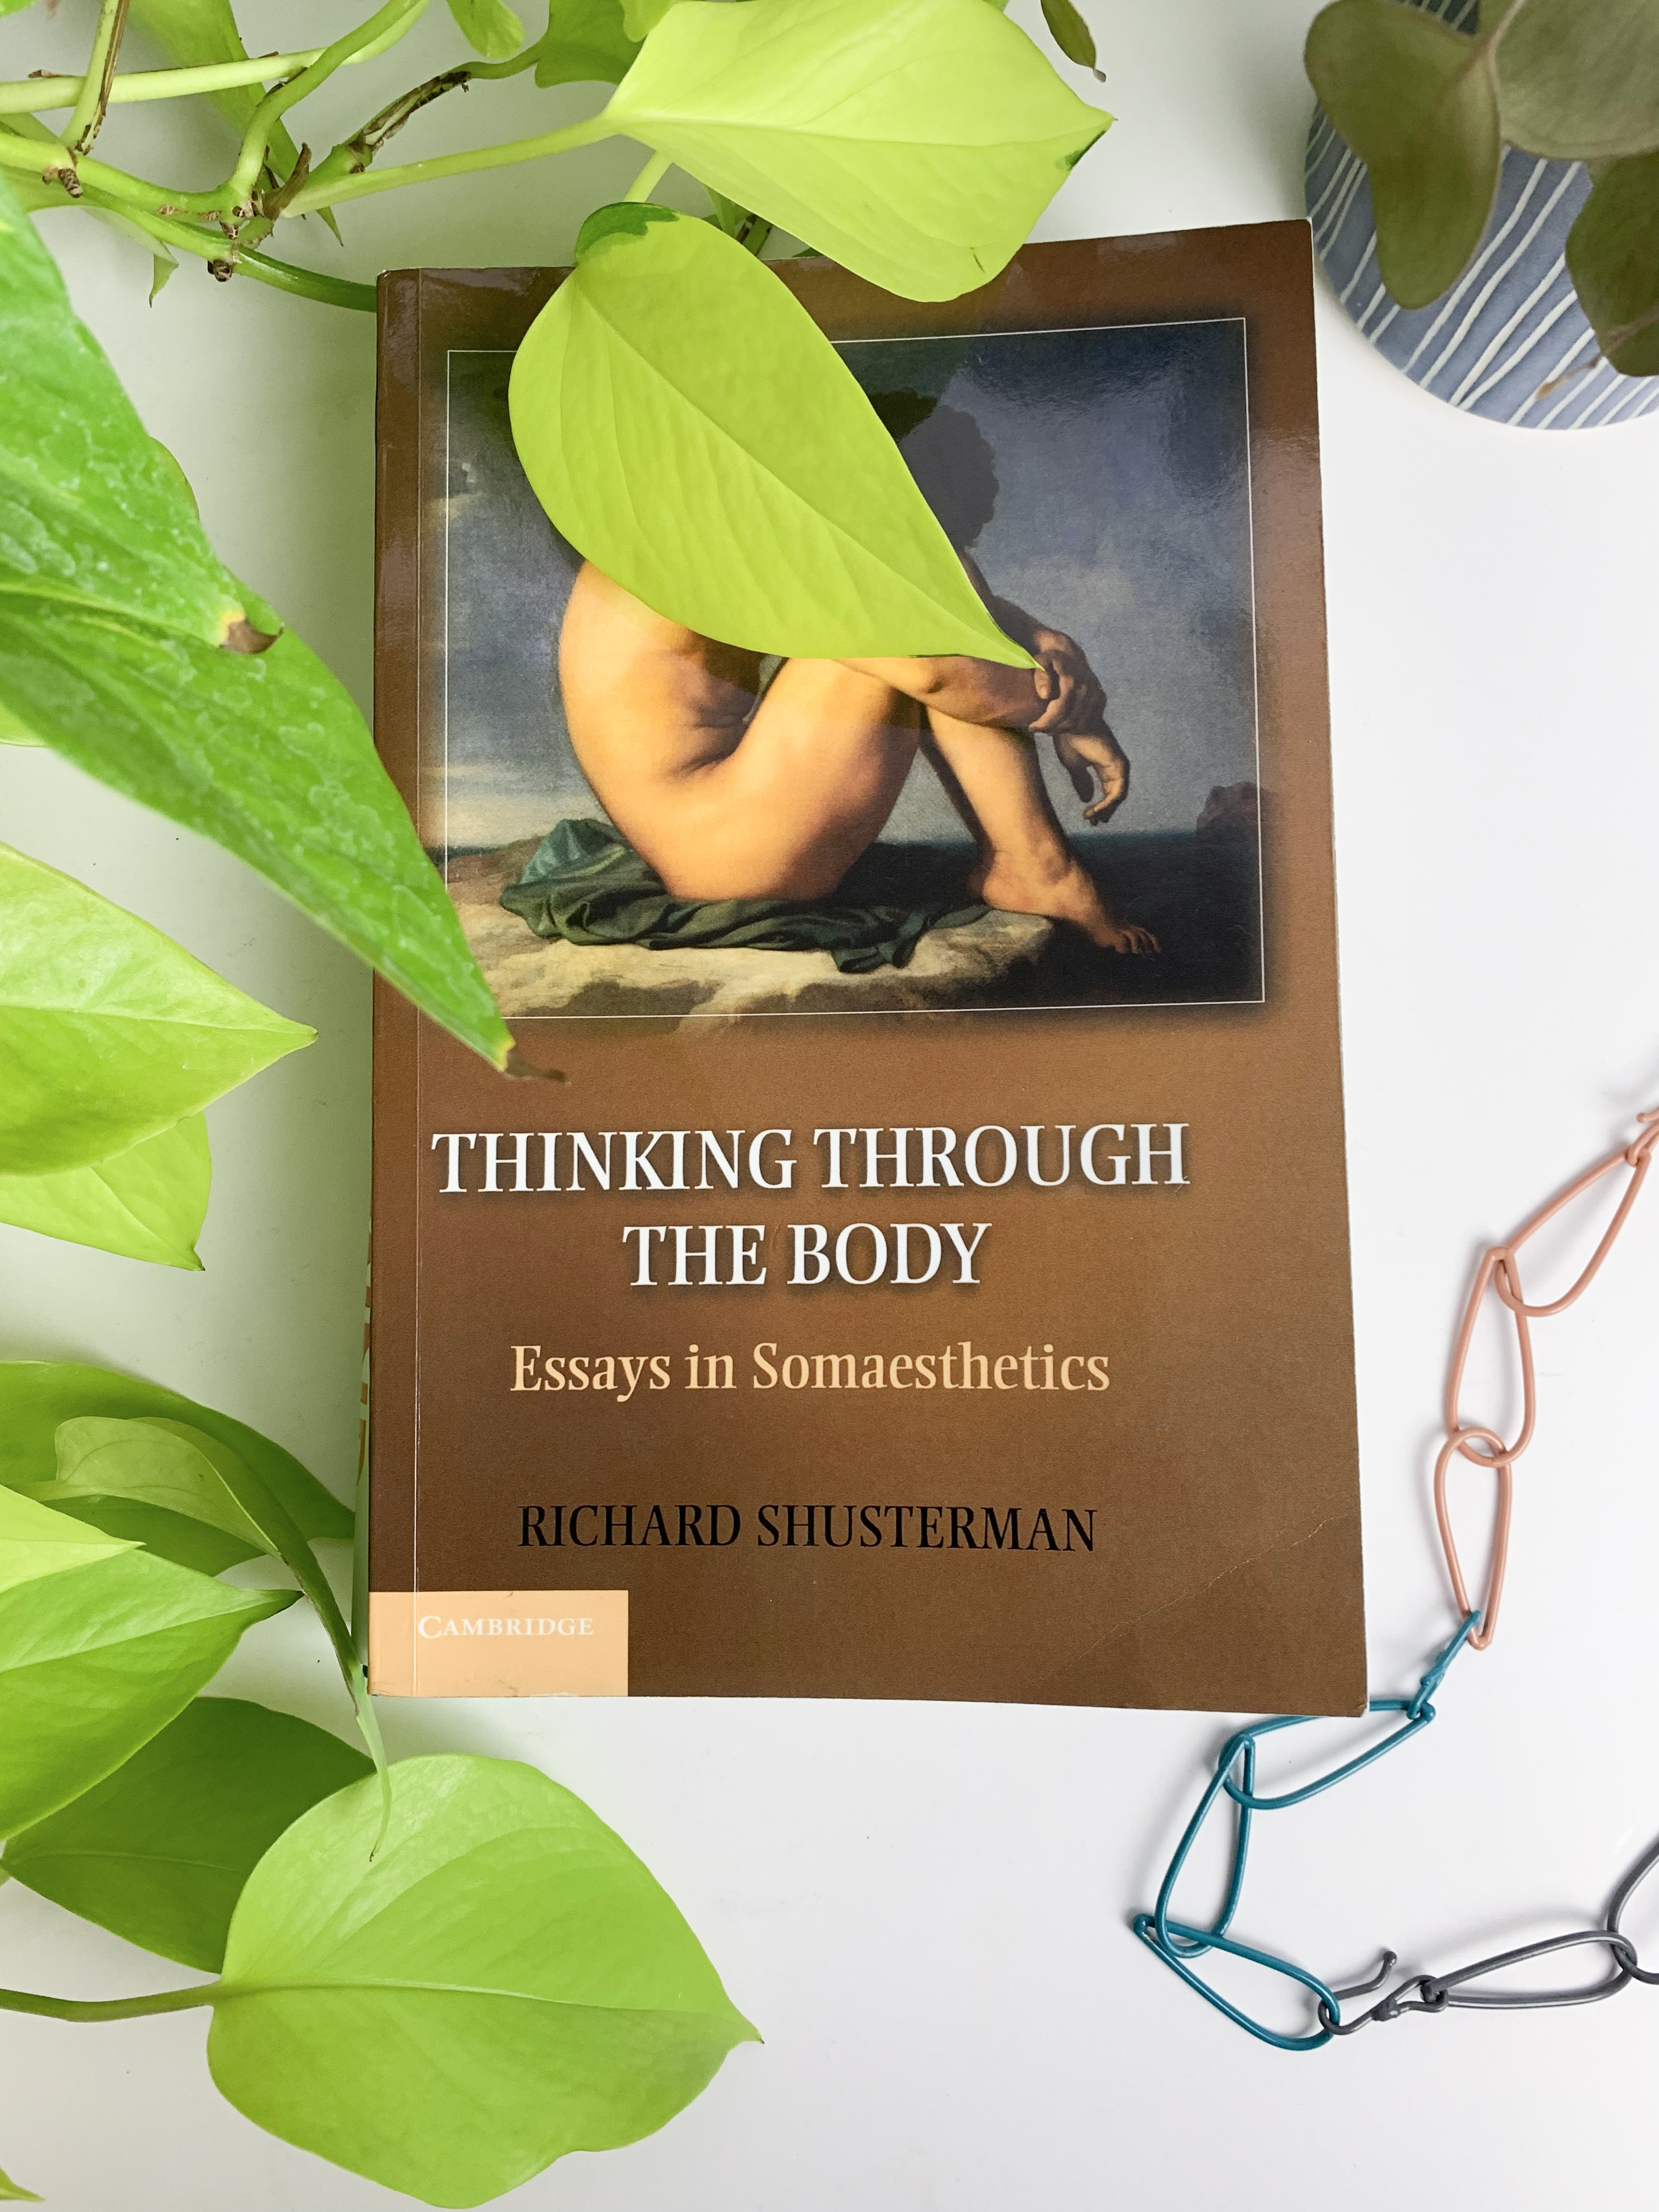 book review: Thinking Through the Body: Essays on Somaesthetics by Richard Shusterman